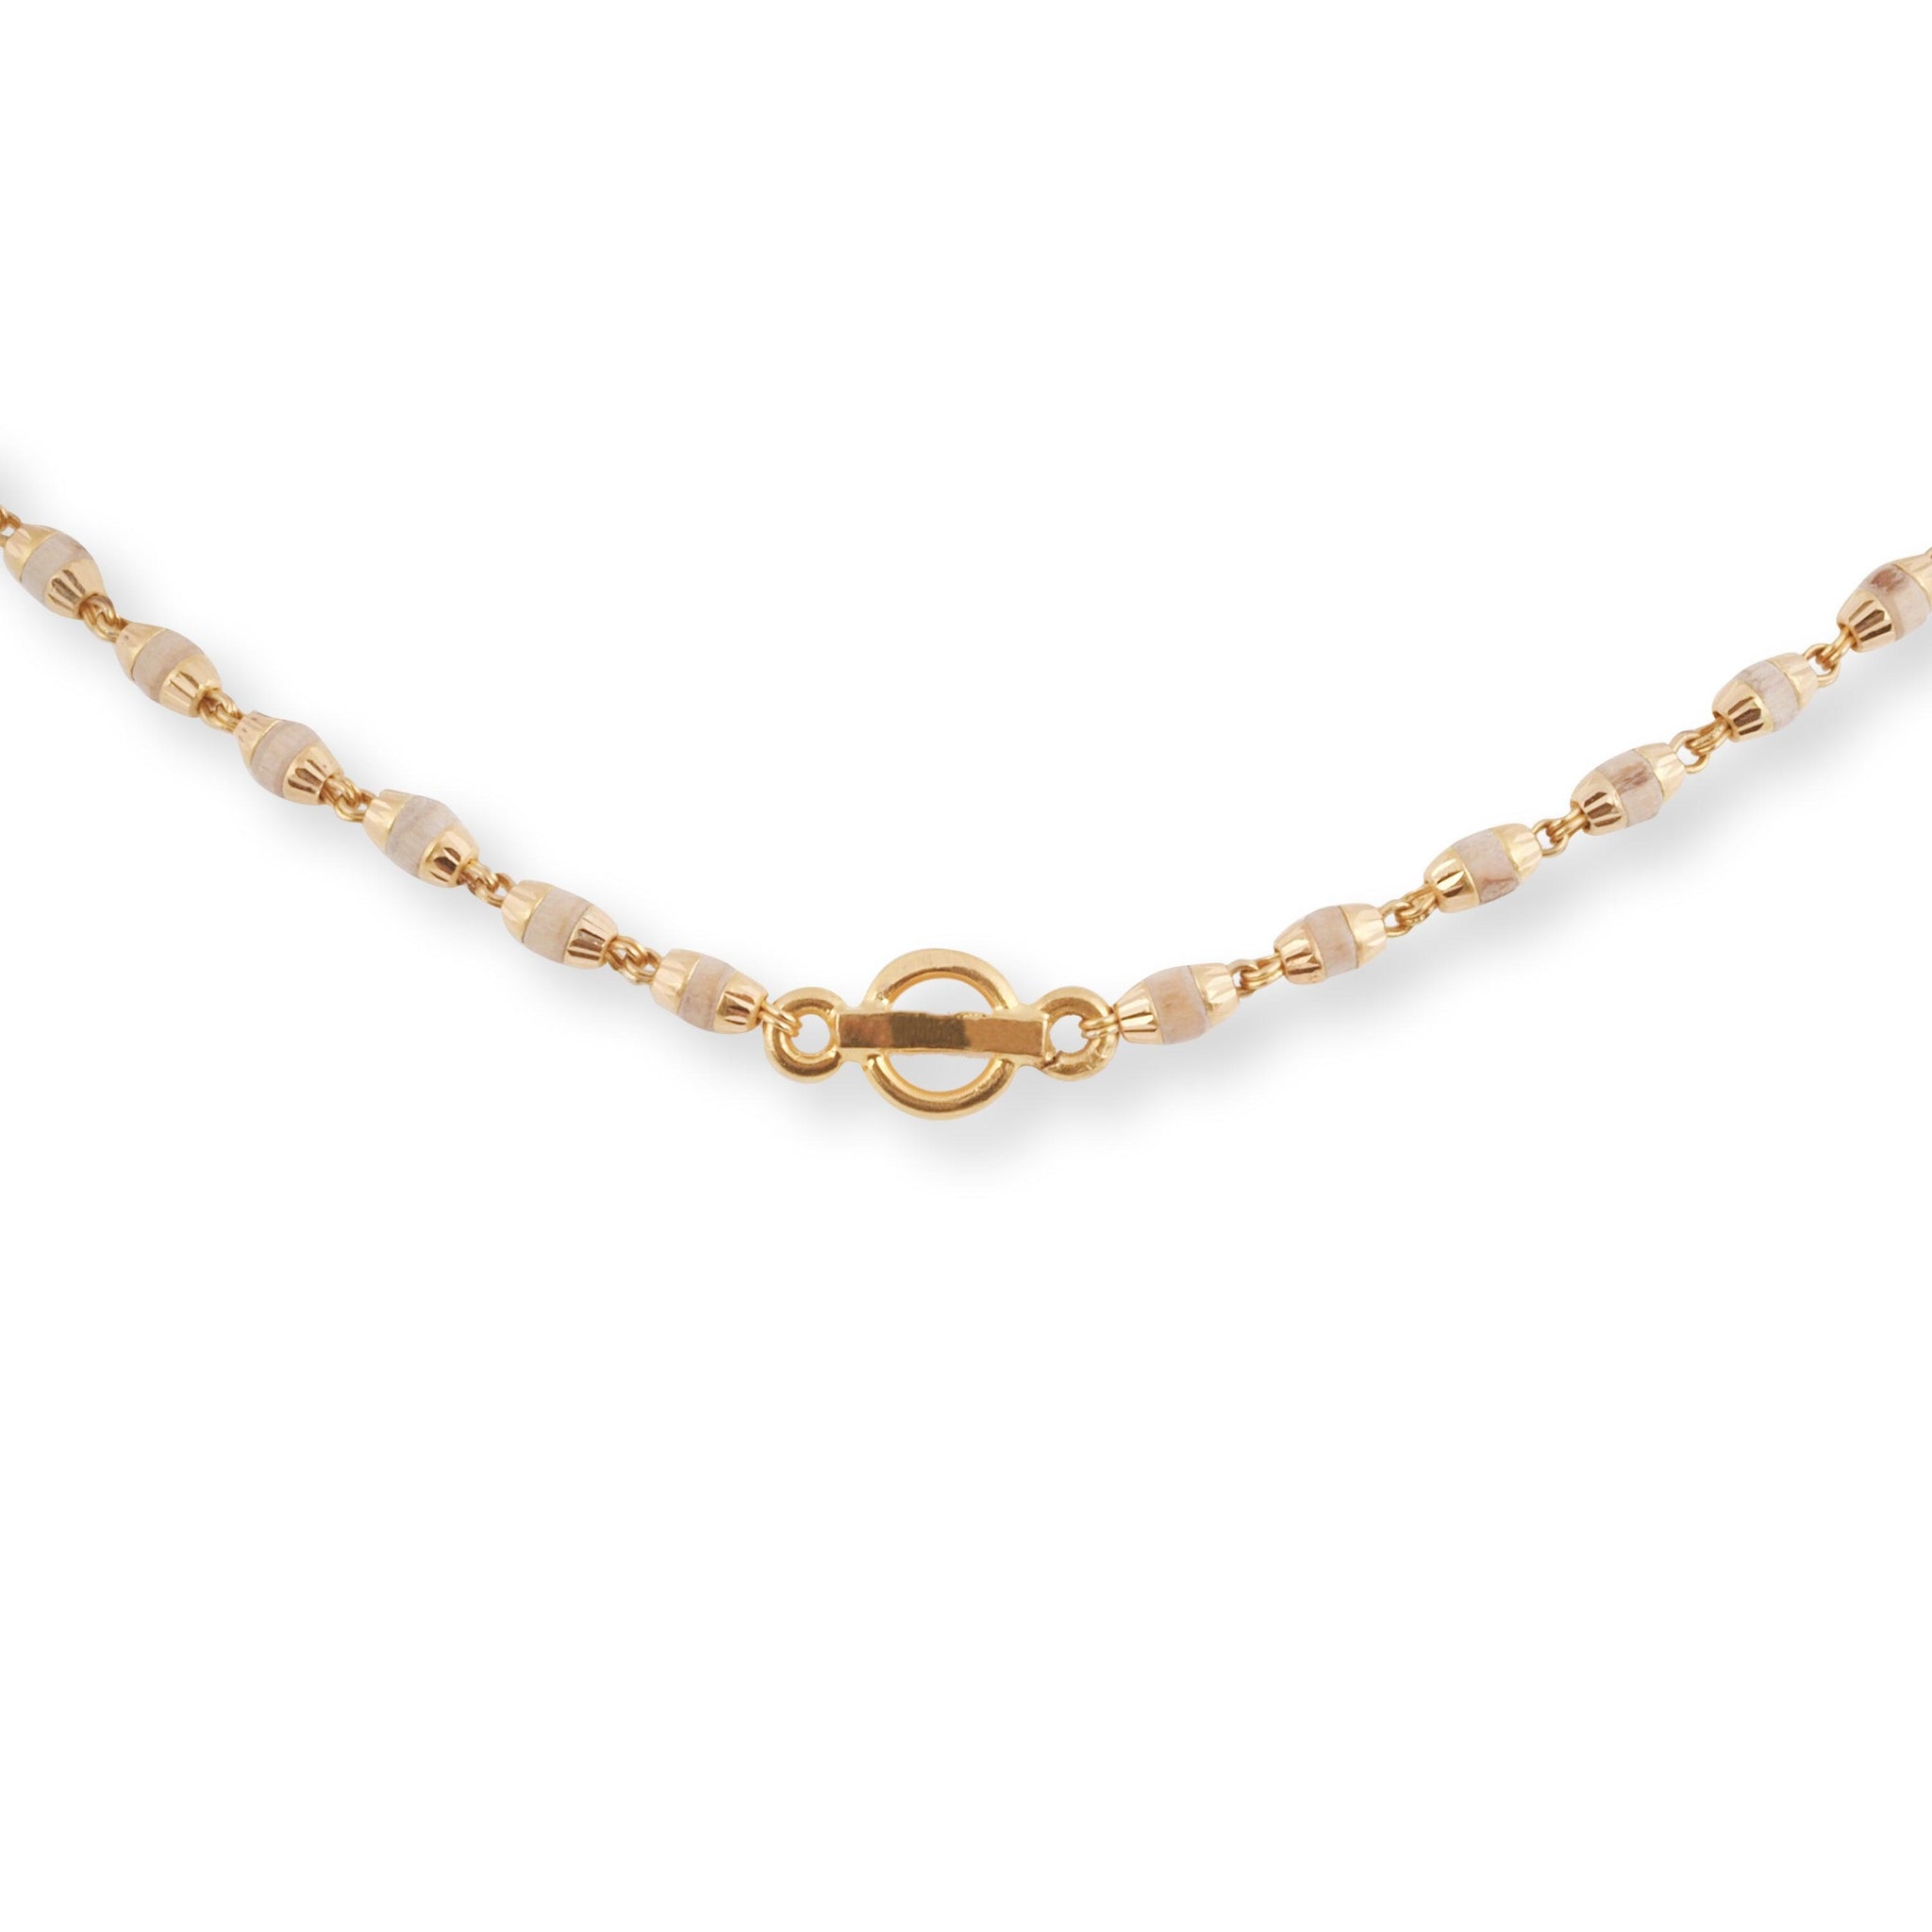 22ct Yellow Gold Chain with Tulsi Beads. C-3811